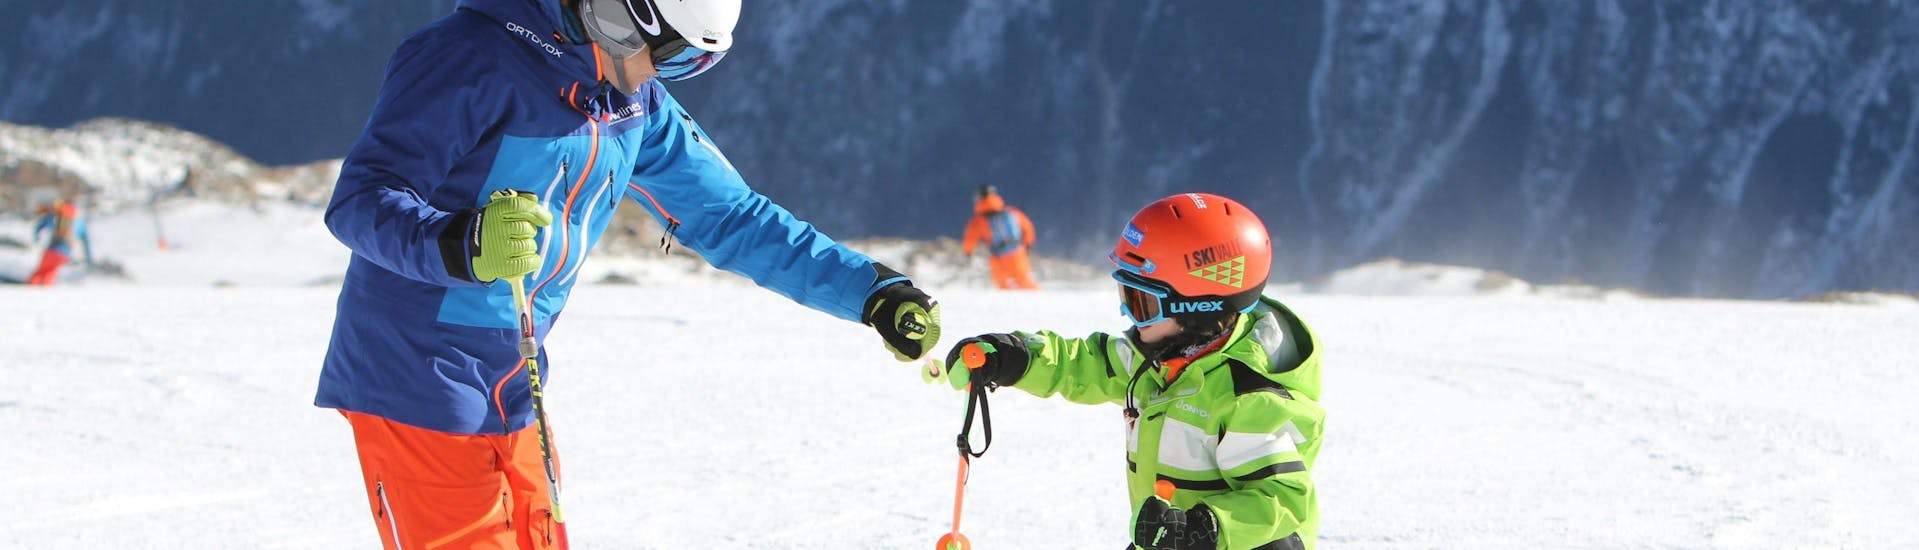 A young skier is having fun with a private ski instructor from the ski school during a Private Ski Lessons for Kids in Obergurgl-Hochgurgl organized by the ski school Ski- und Snowboardschule SNOWLINES Sölden in the ski resort of Sölden.